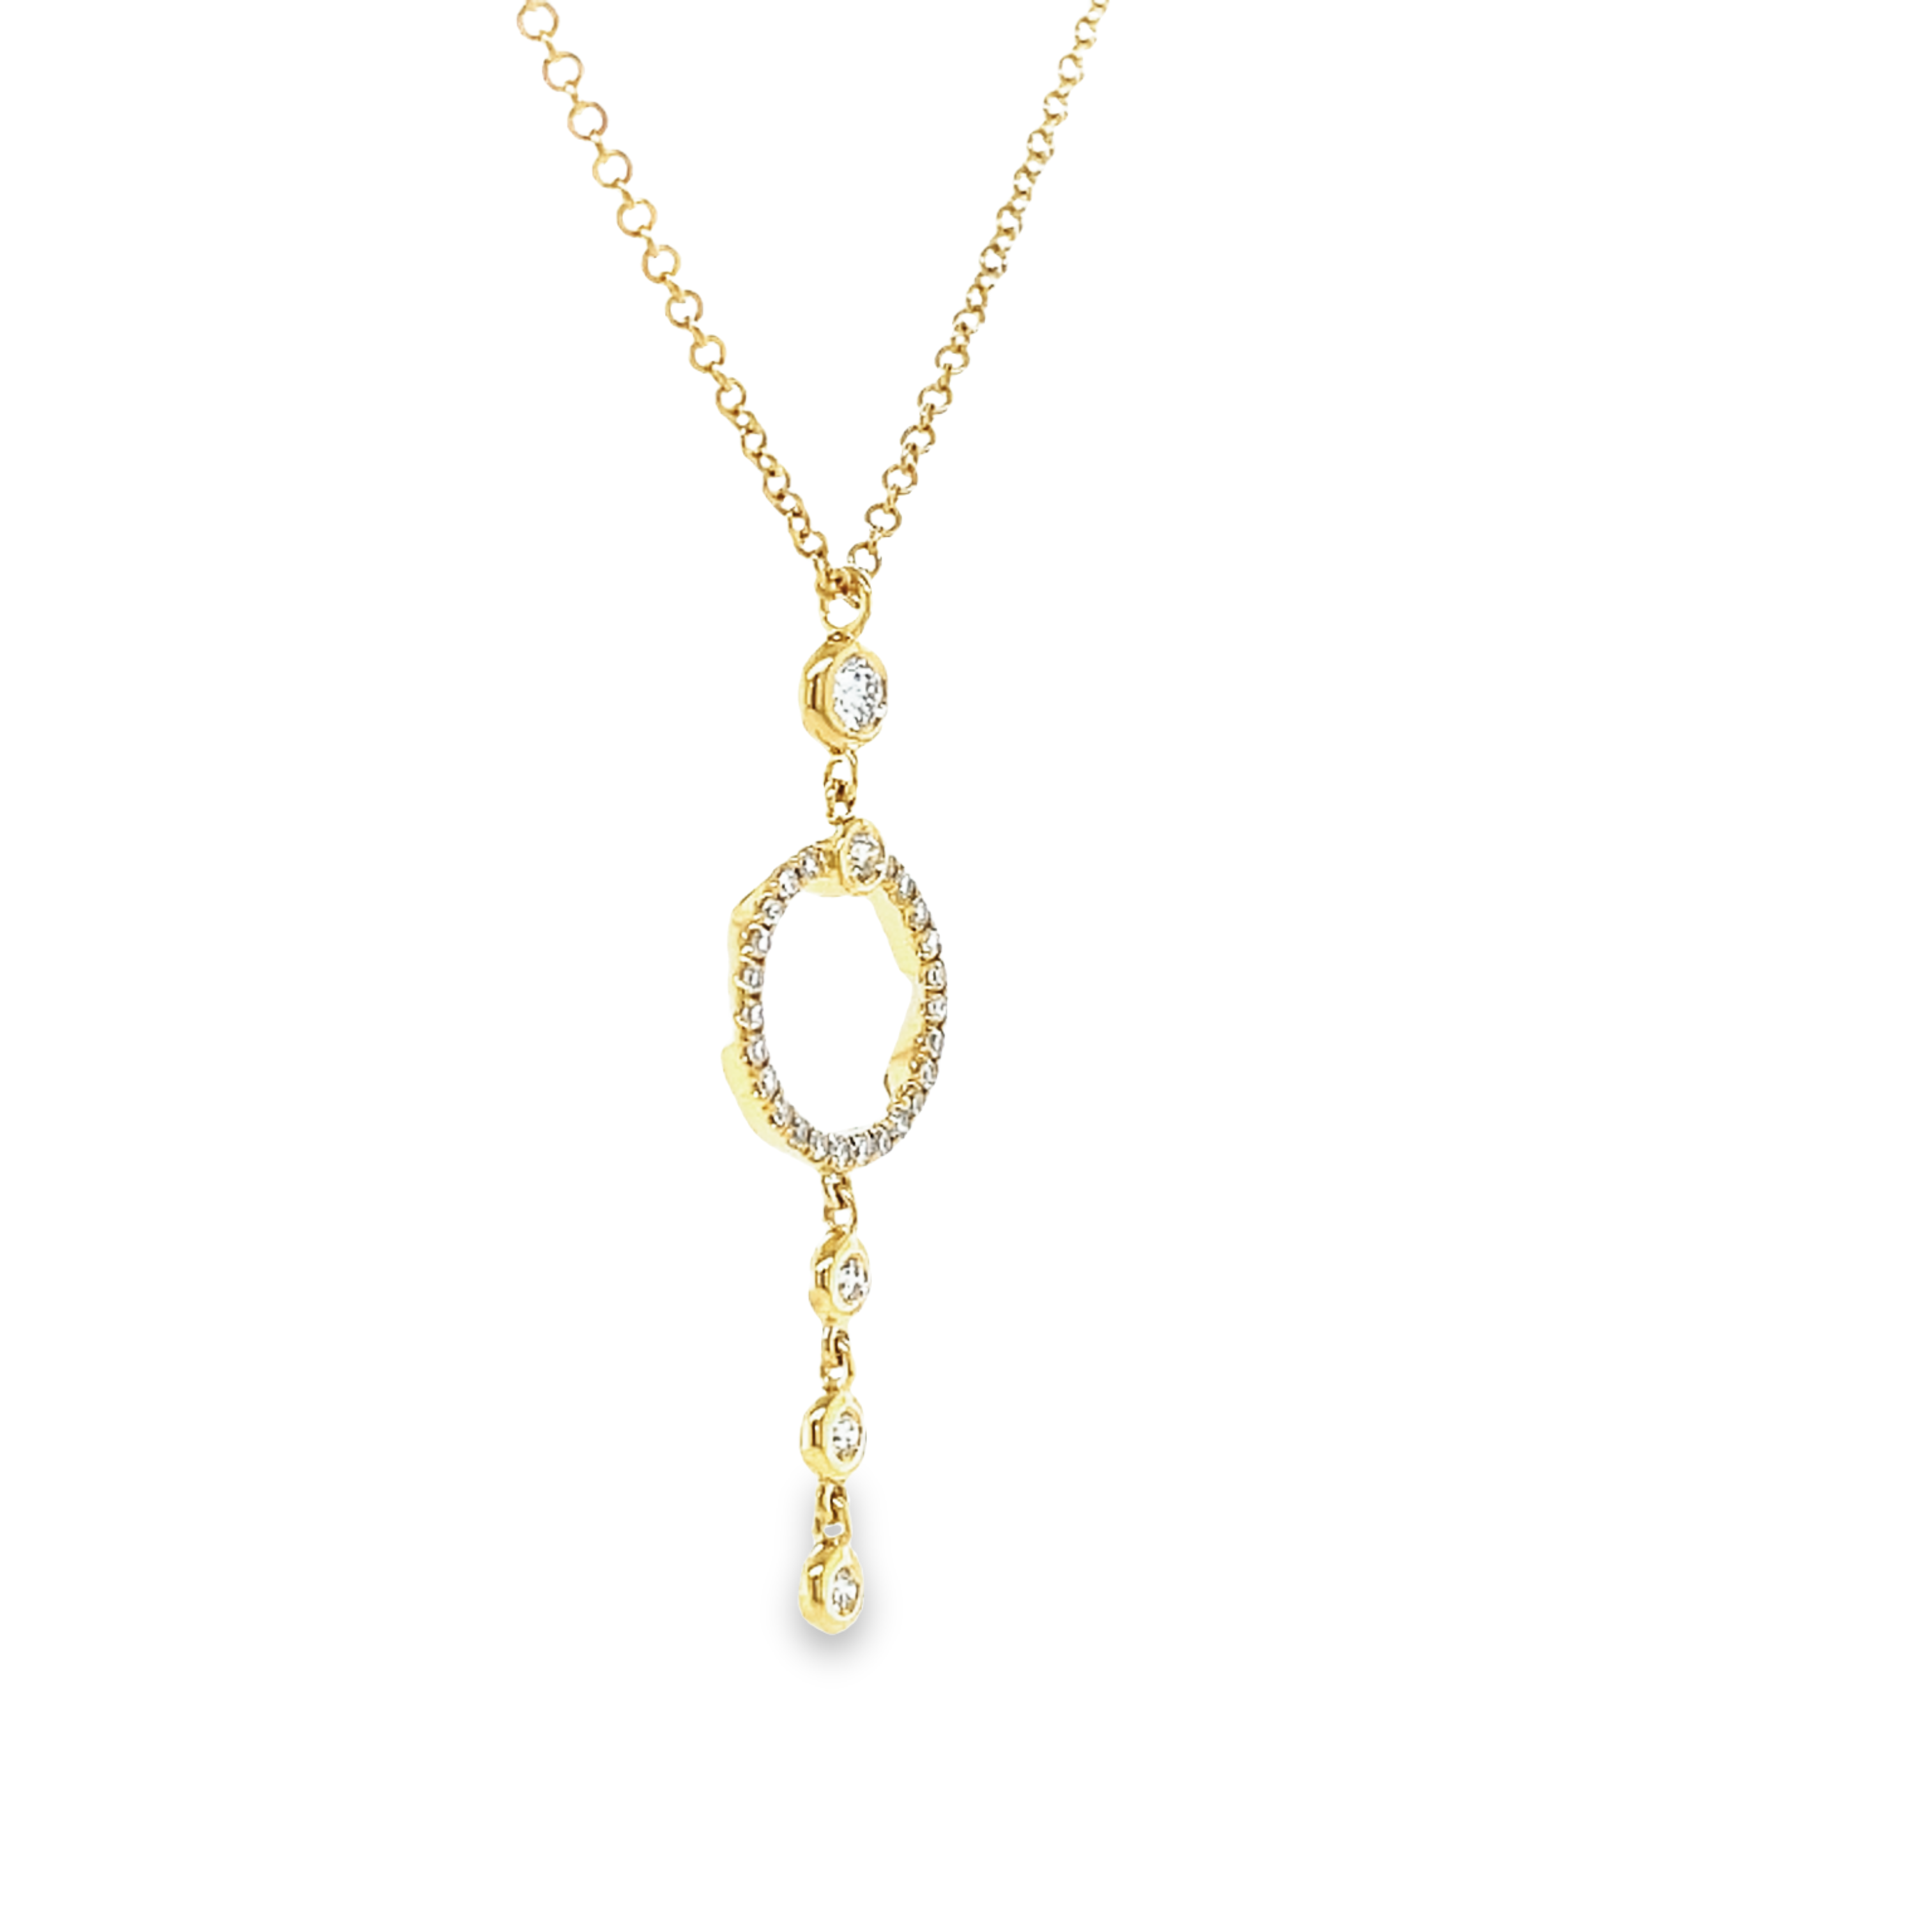 Adorn yourself with a dainty yet dazzling diamond necklace! 0.17 cts of round diamonds set in luxurious 14k yellow gold, connected by a secure lobster clasp and 1.5" long diamond circle, this stunning piece hangs 18" long with two sizable loops.